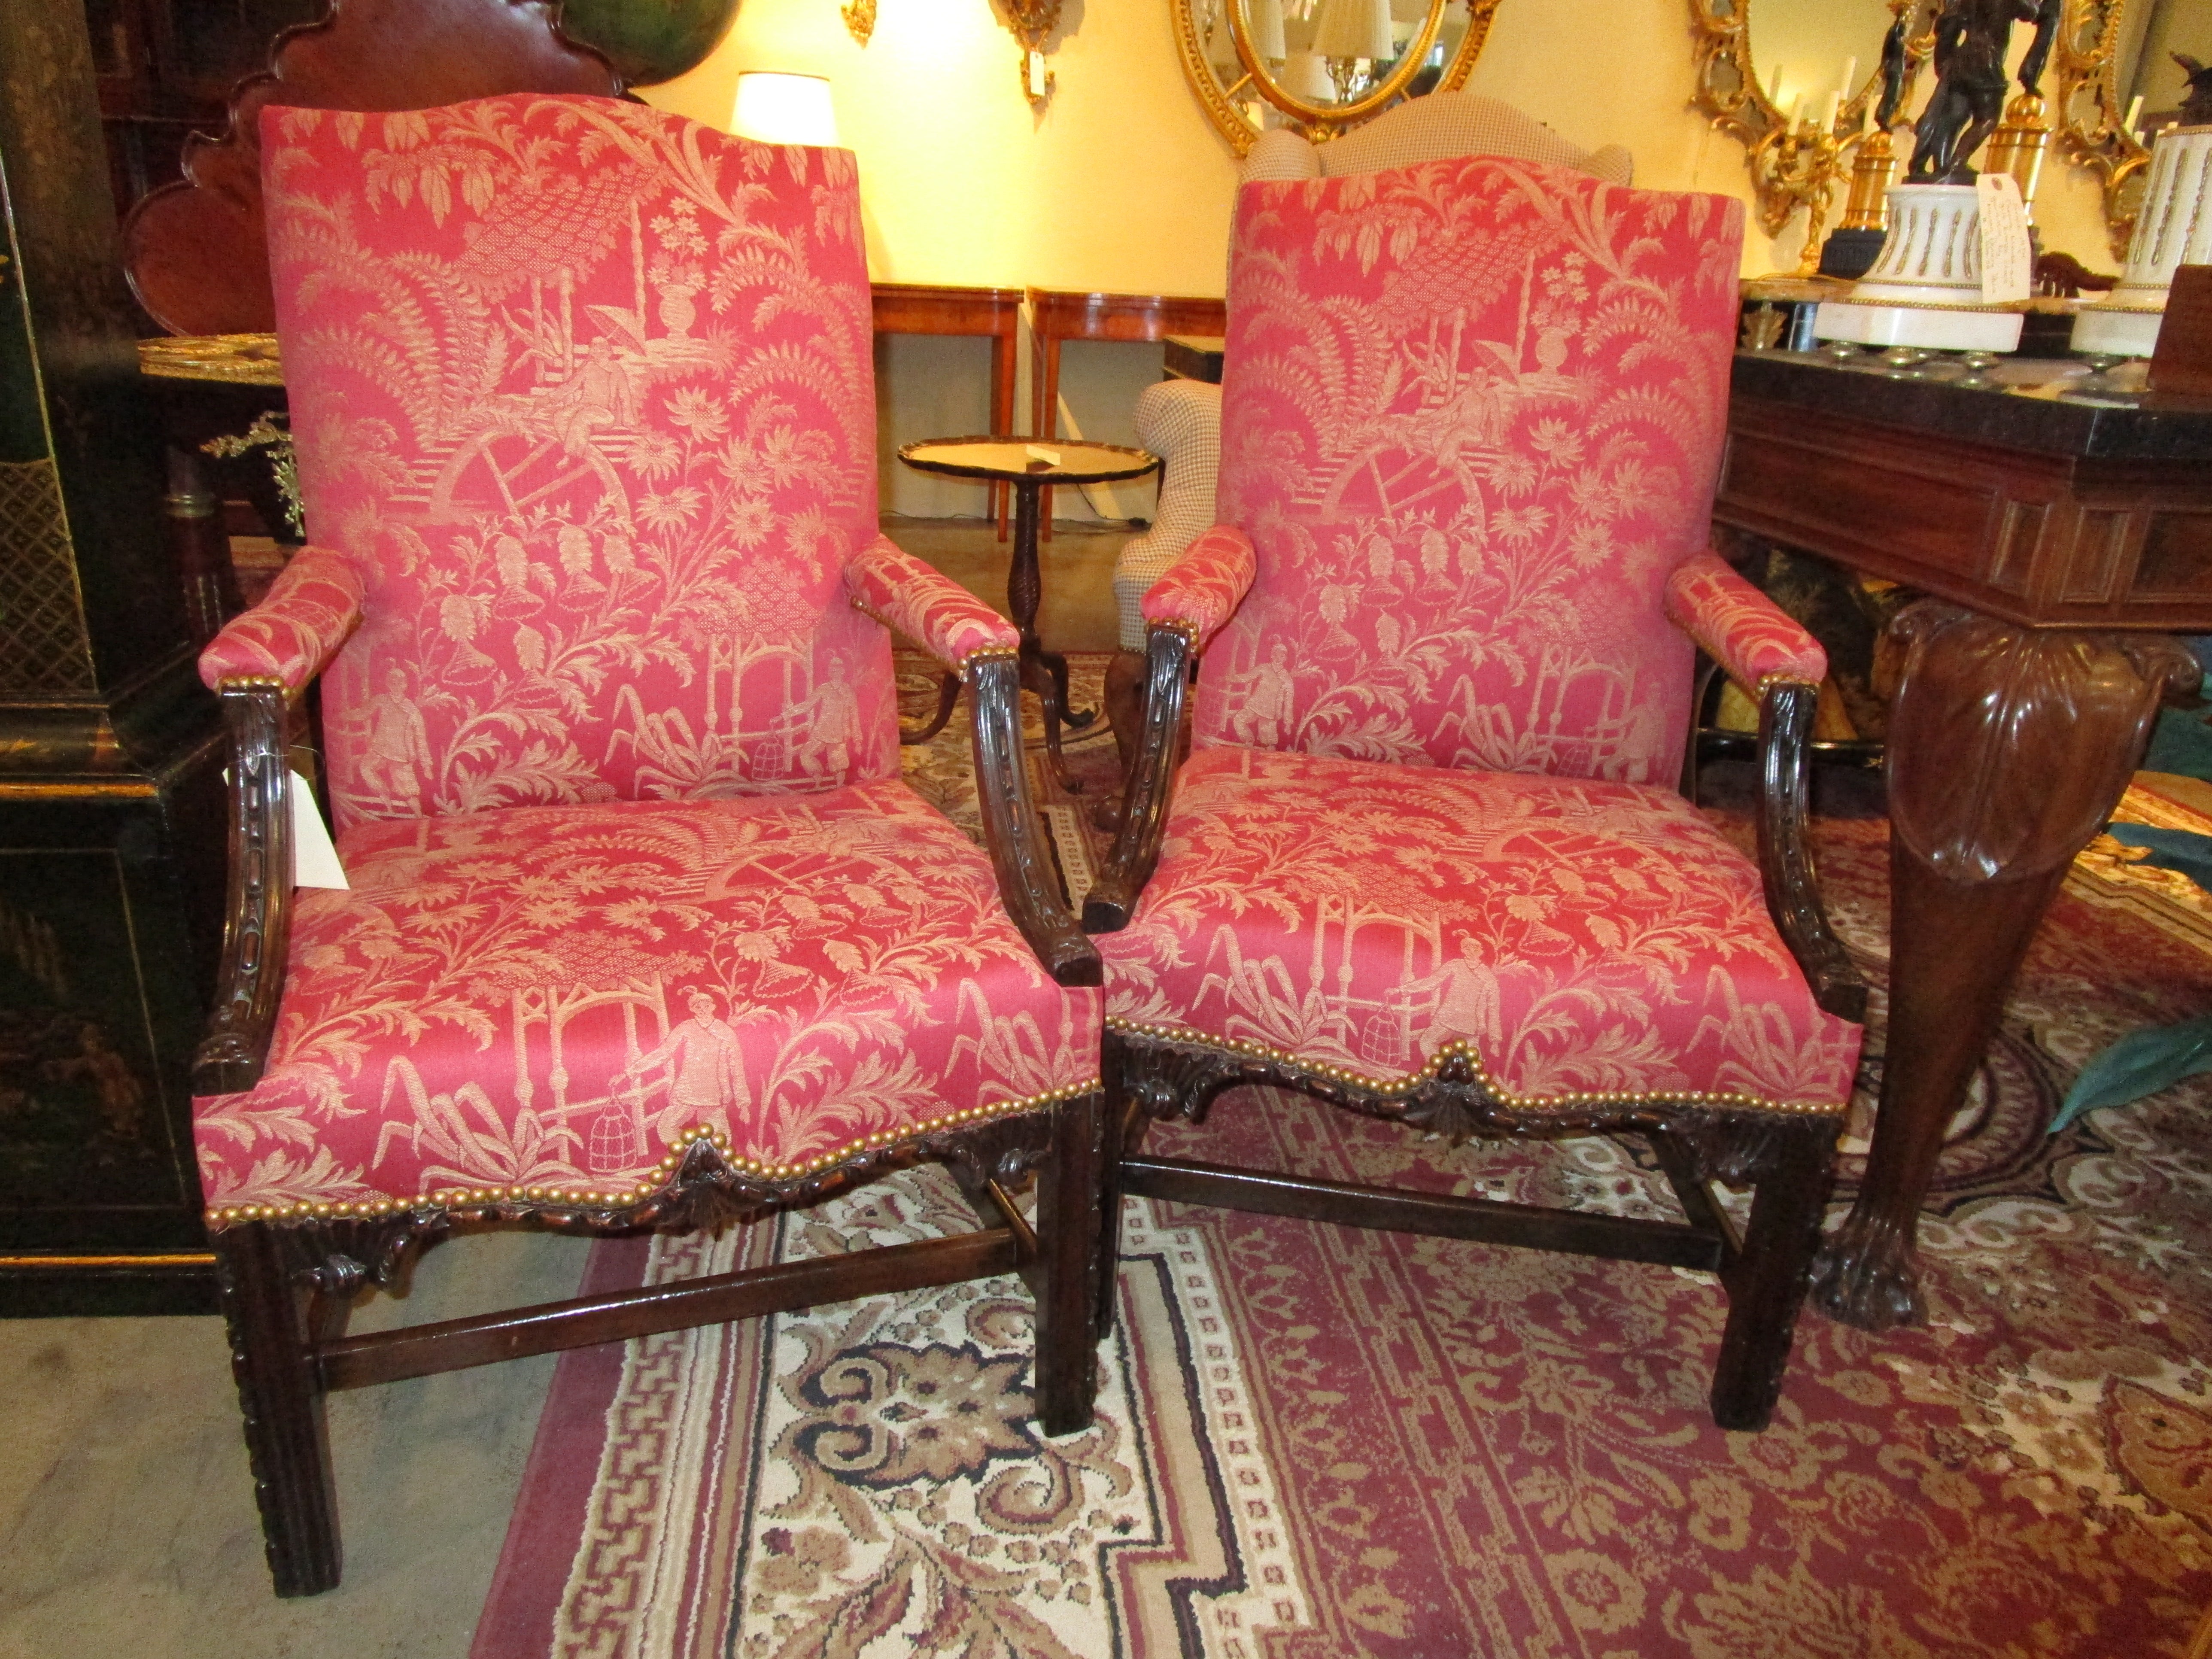 A fine and rare pair of late 18th century Chinese Chippendale mahogany carved armchairs. Beautiful detail with a Chinese material in excellent condition.